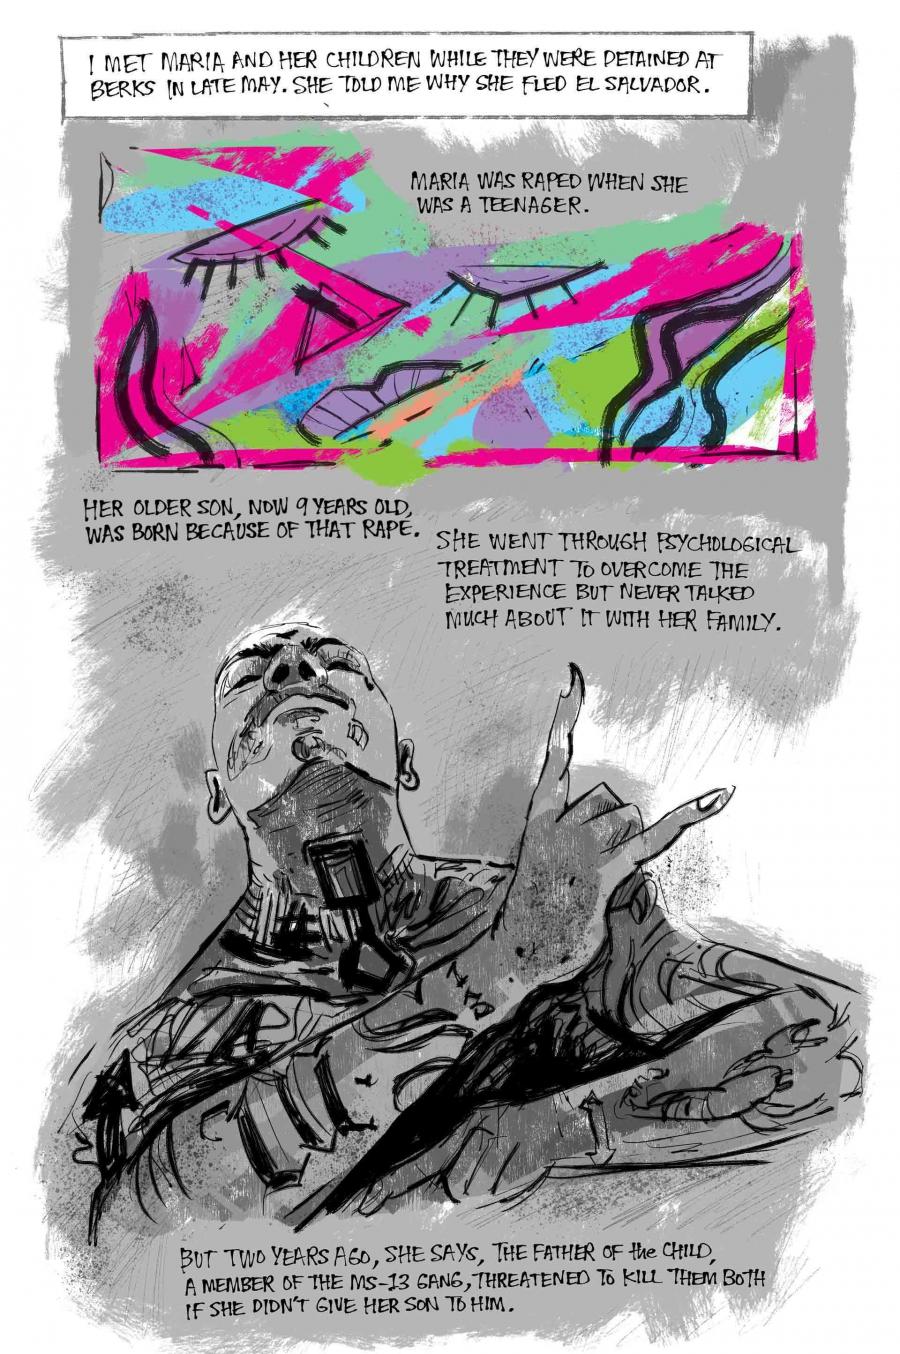 Illustration of trauma (colors and jagged lines) and an MS-13 gang member